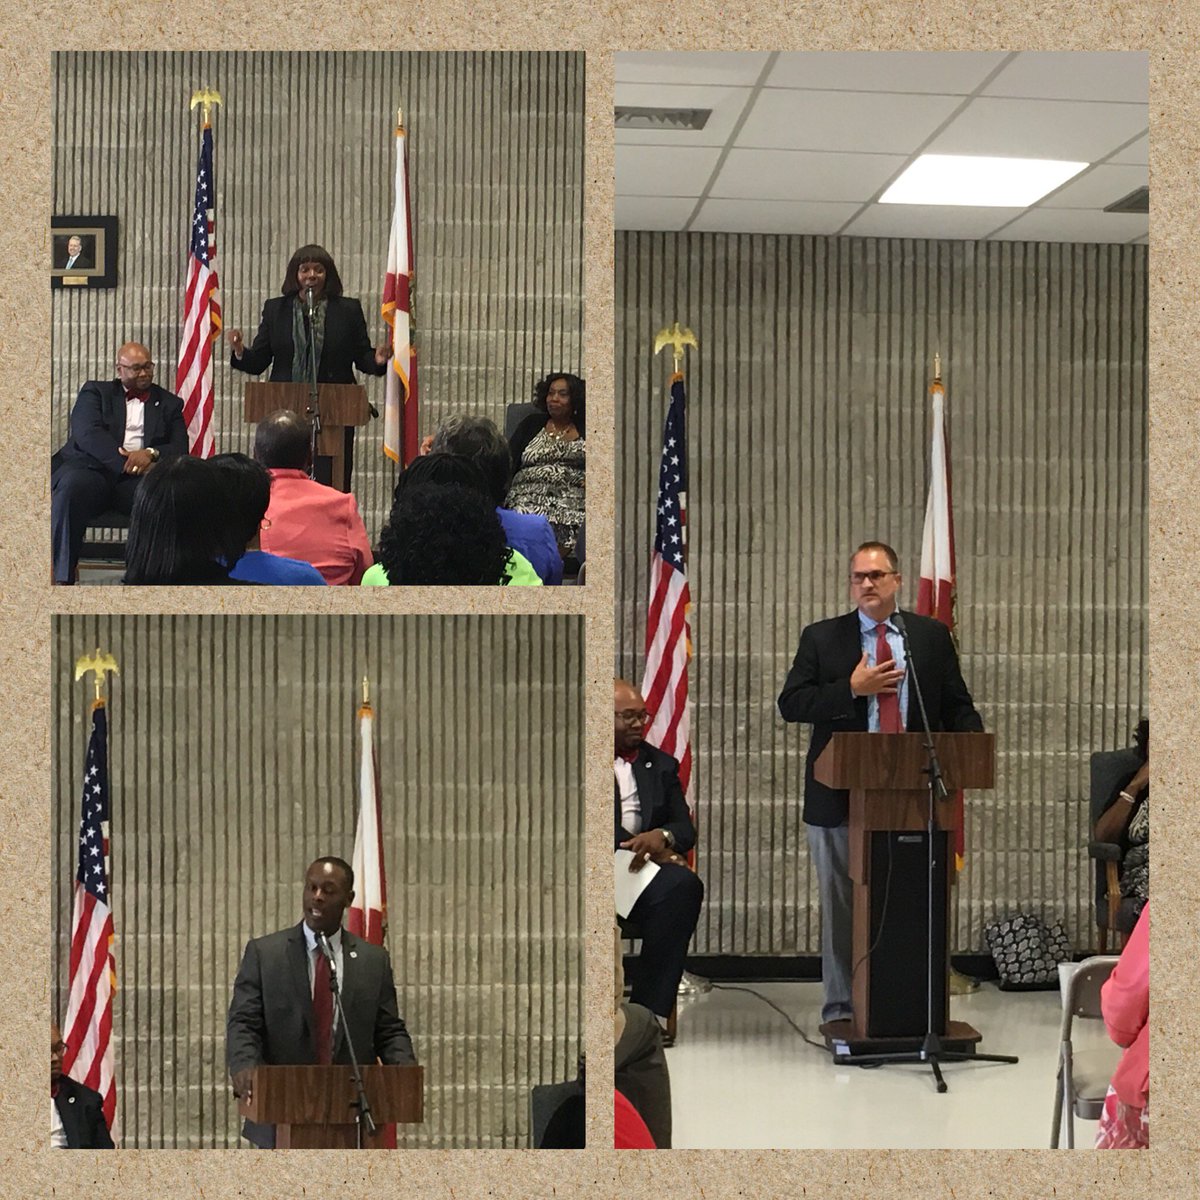 Remarks of welcome and support from Keith Oswald, Howard Hepburn, and Marcia Andrews @561Sdpbc @HowardHepburn @GladesRegion @SuptFennoy @pbcsd